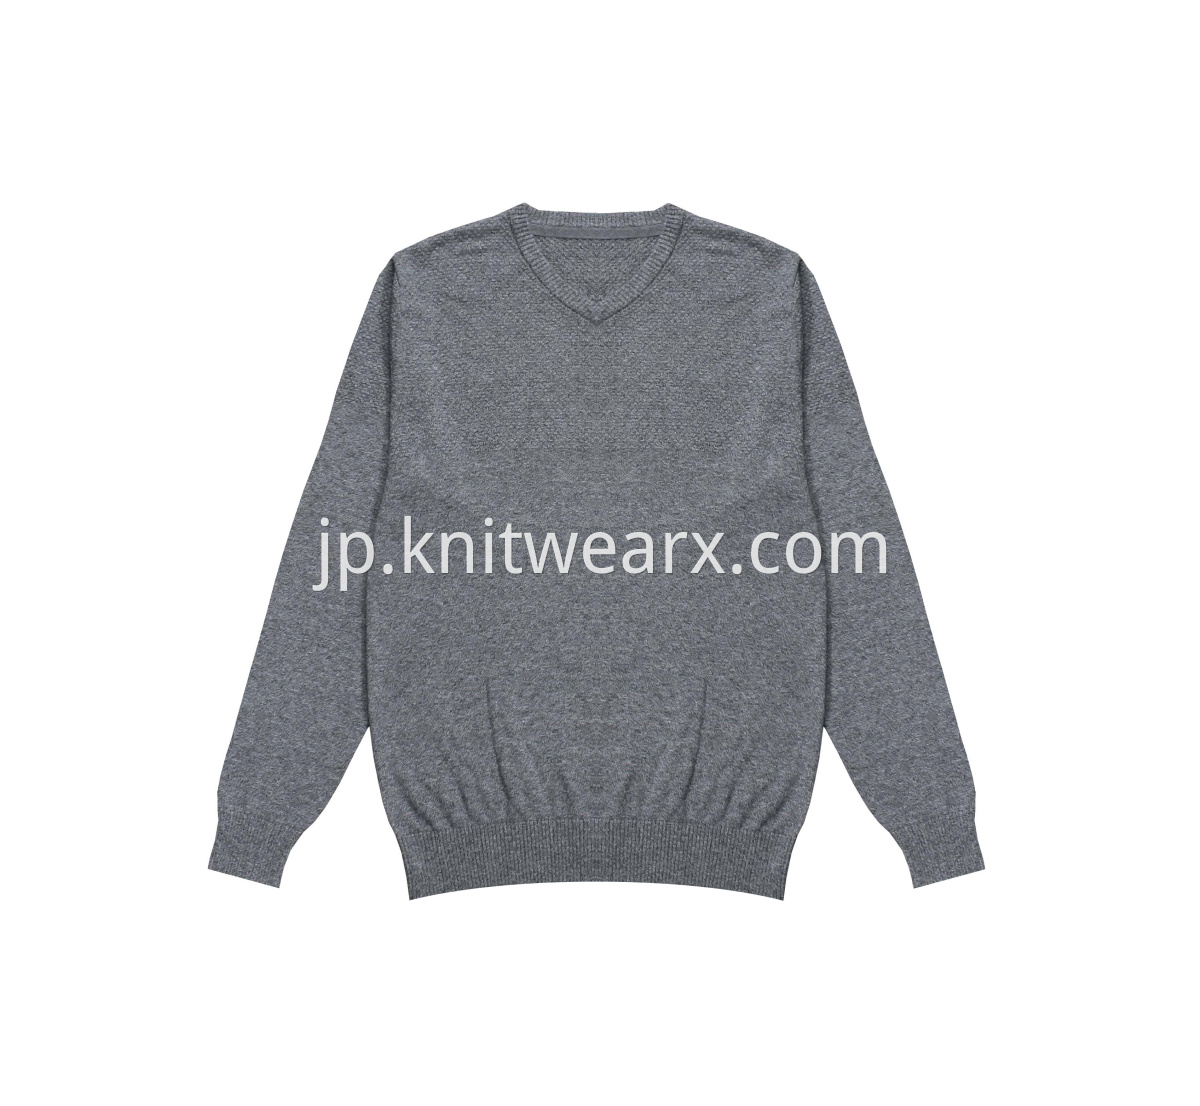 Men's Classic Knitted 100% Cotton Sweater V-neck Knitwear Pullover